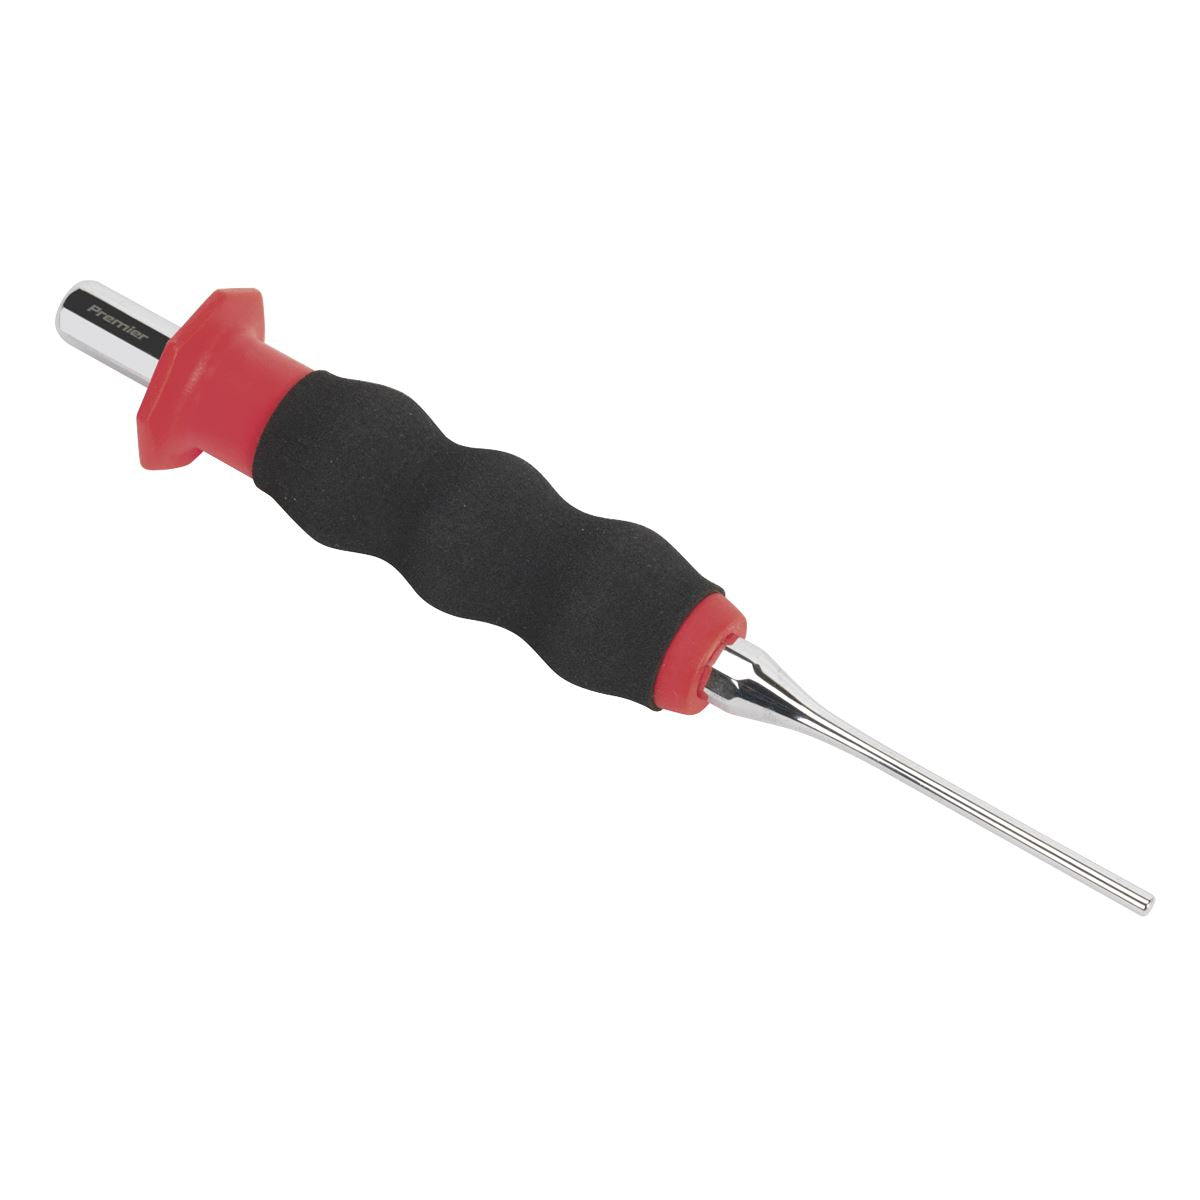 Sealey Premier Sheathed Parallel Pin Punch Ø3mm